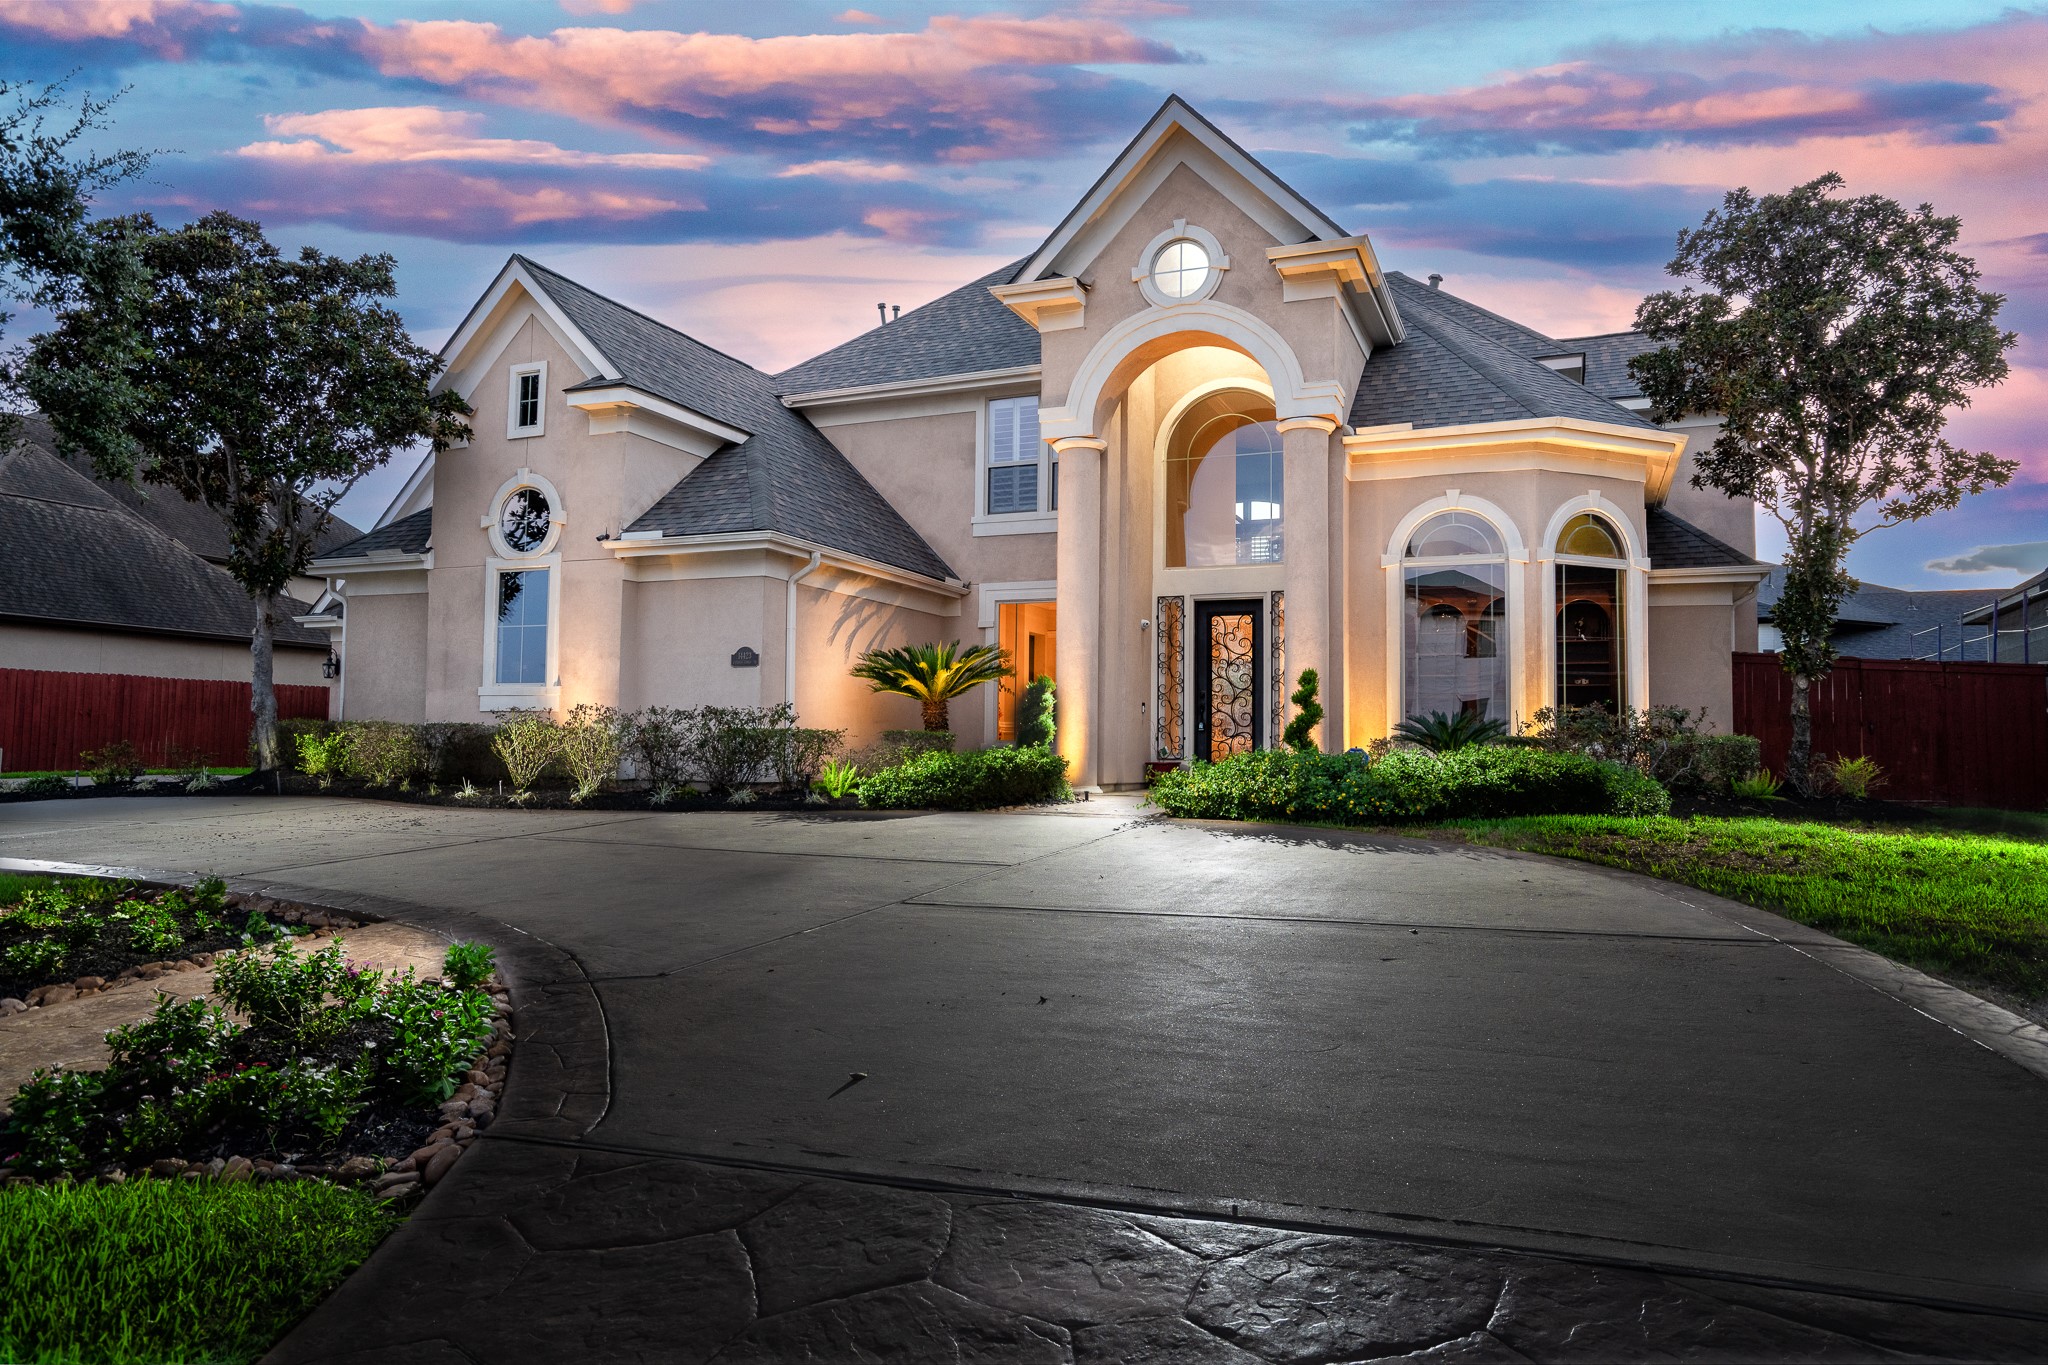 Welcome to Leyland Shores, a gated golf community in Cypress!